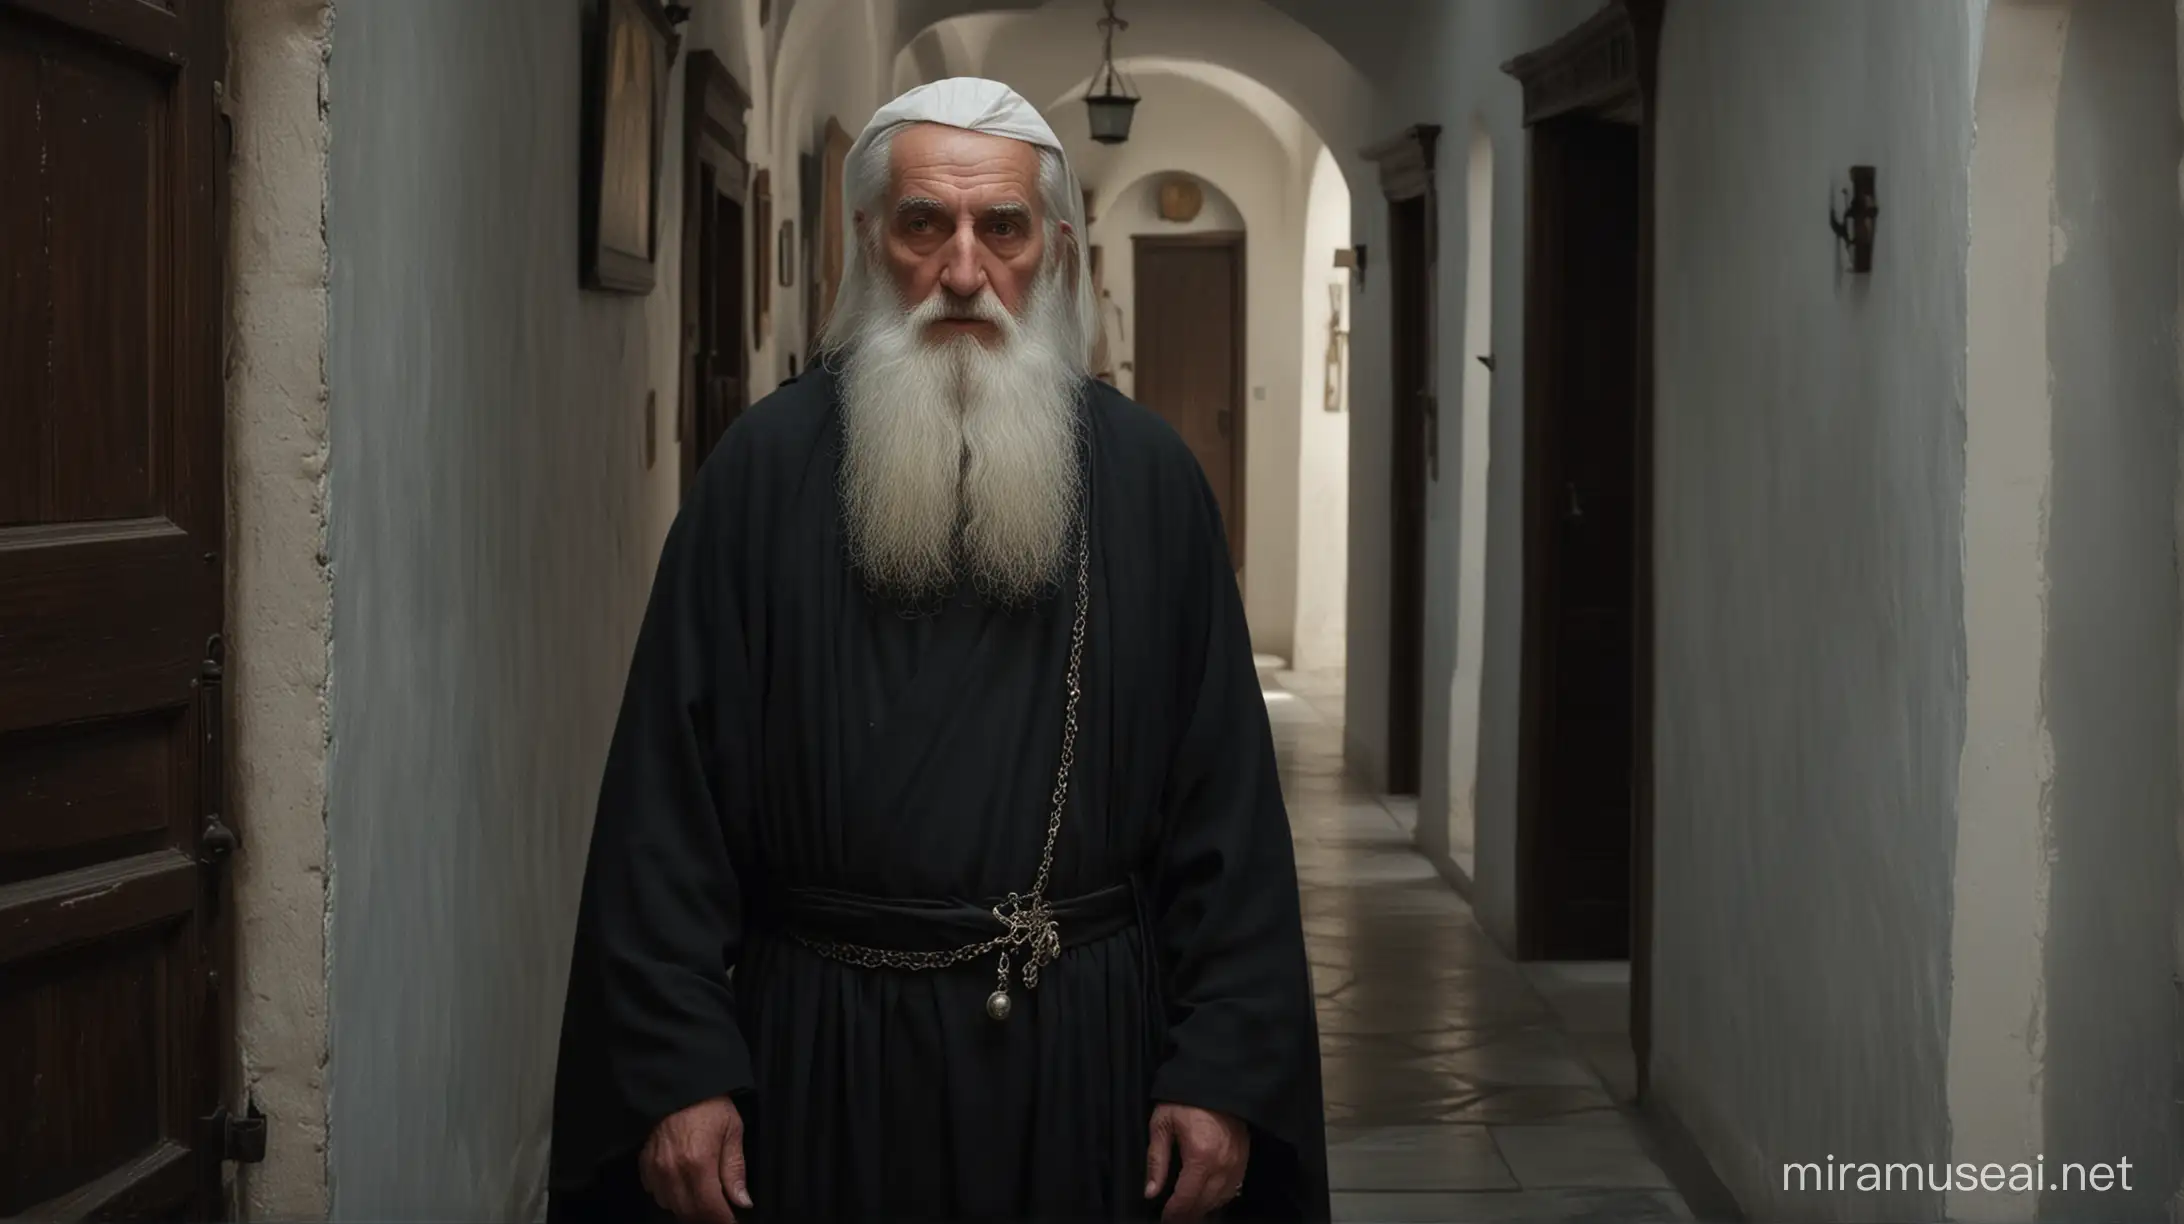 Saint Kosmas of Aetolia, old man with long white beard of short stature, the clothing is black and similar to that of a Greek Orthodox monk, 18th century, Greece, Saint Cosmas is just staring straight ahead, in a hallway of the monastery on Mount Athos, frontal shot, hyper-realistic historical cinematography